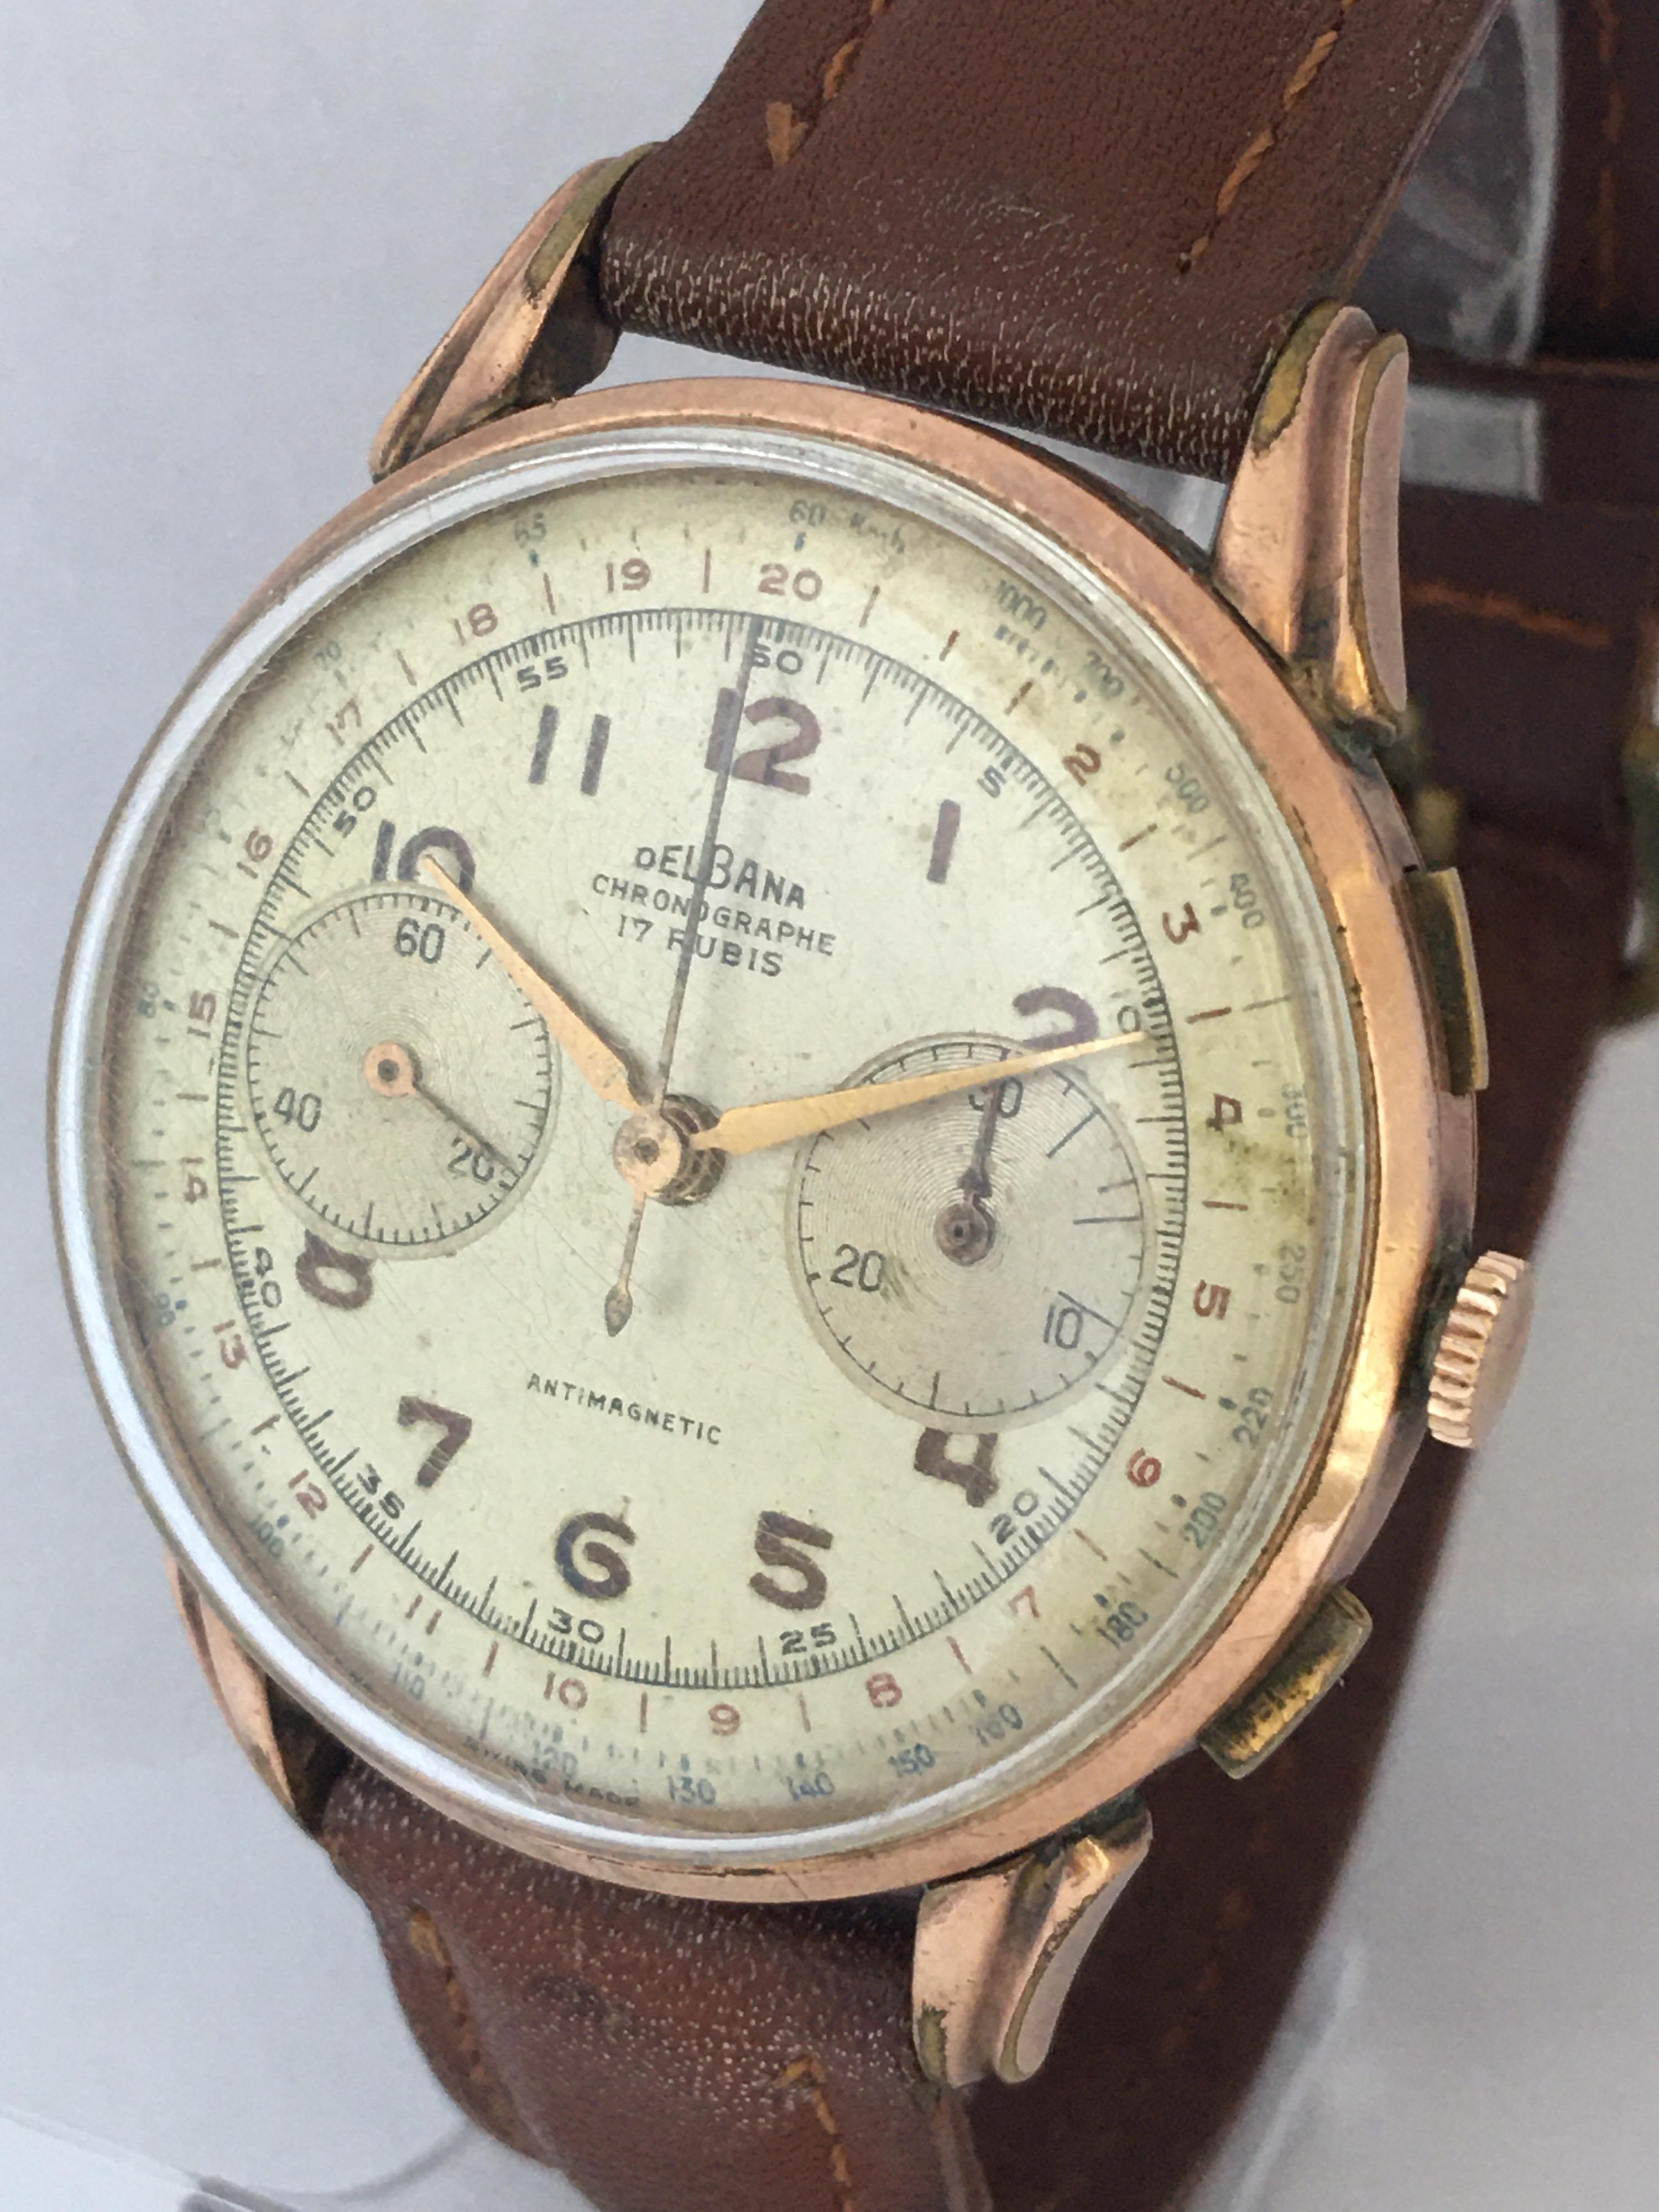 Vintage 1950s Gold Plate Chronograph Mechanical Gents Watch by Delbana Watch 6